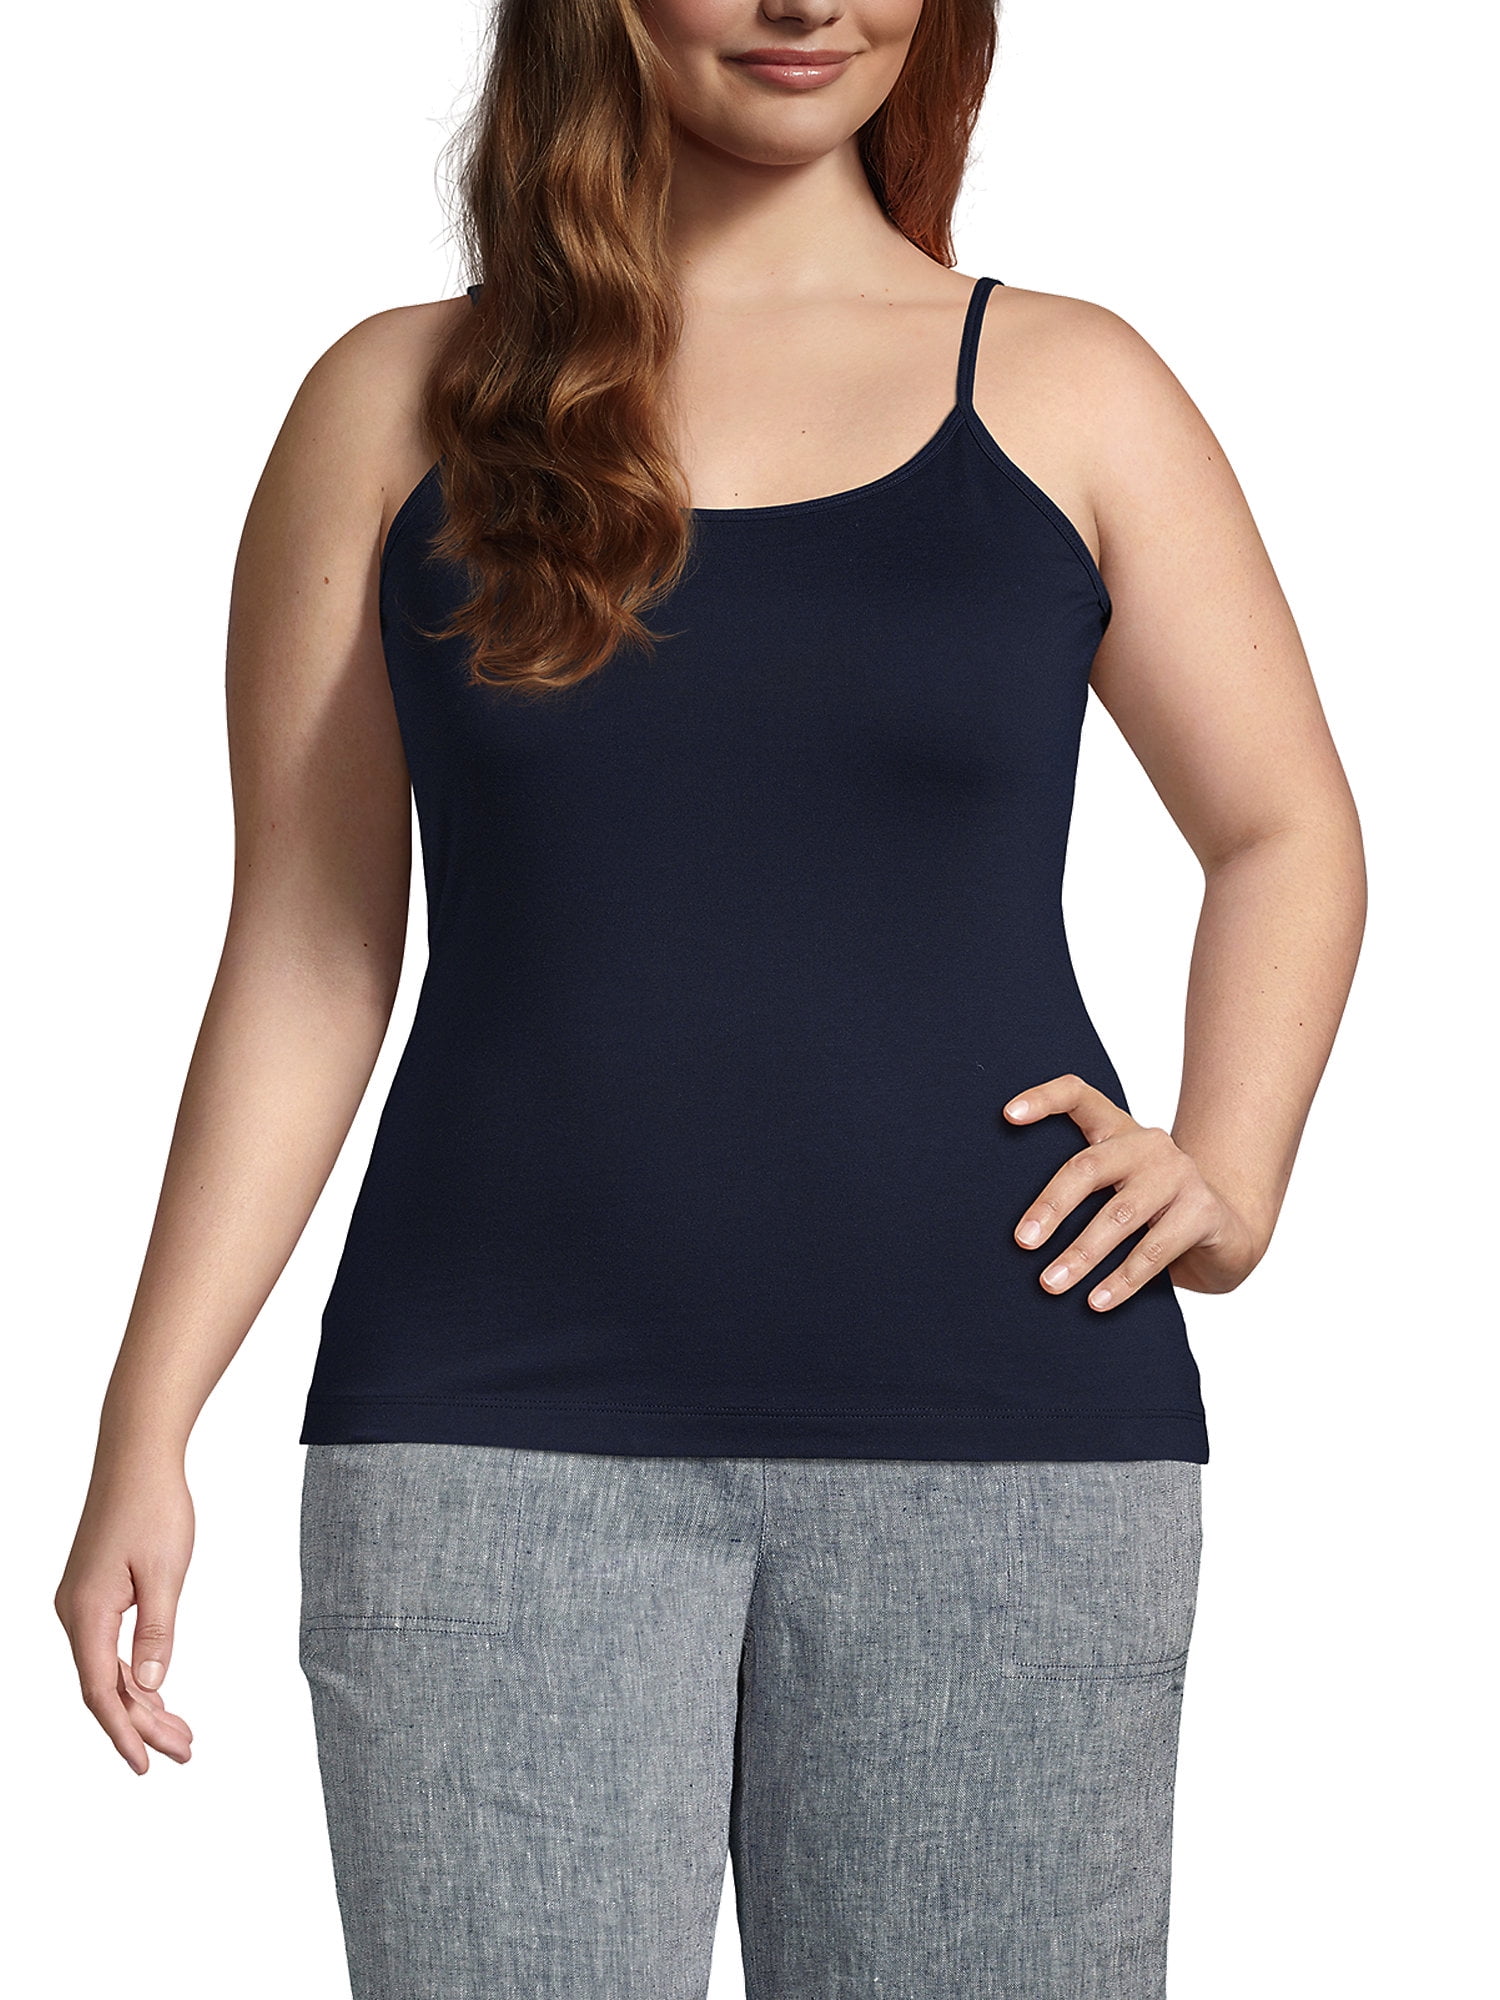 Buy Women's Plus Size Modal Padded Camisole with Built in Bra Cami  Adjustable Straps Solid Color Yoga Tank Tops S-5XL,6XL at